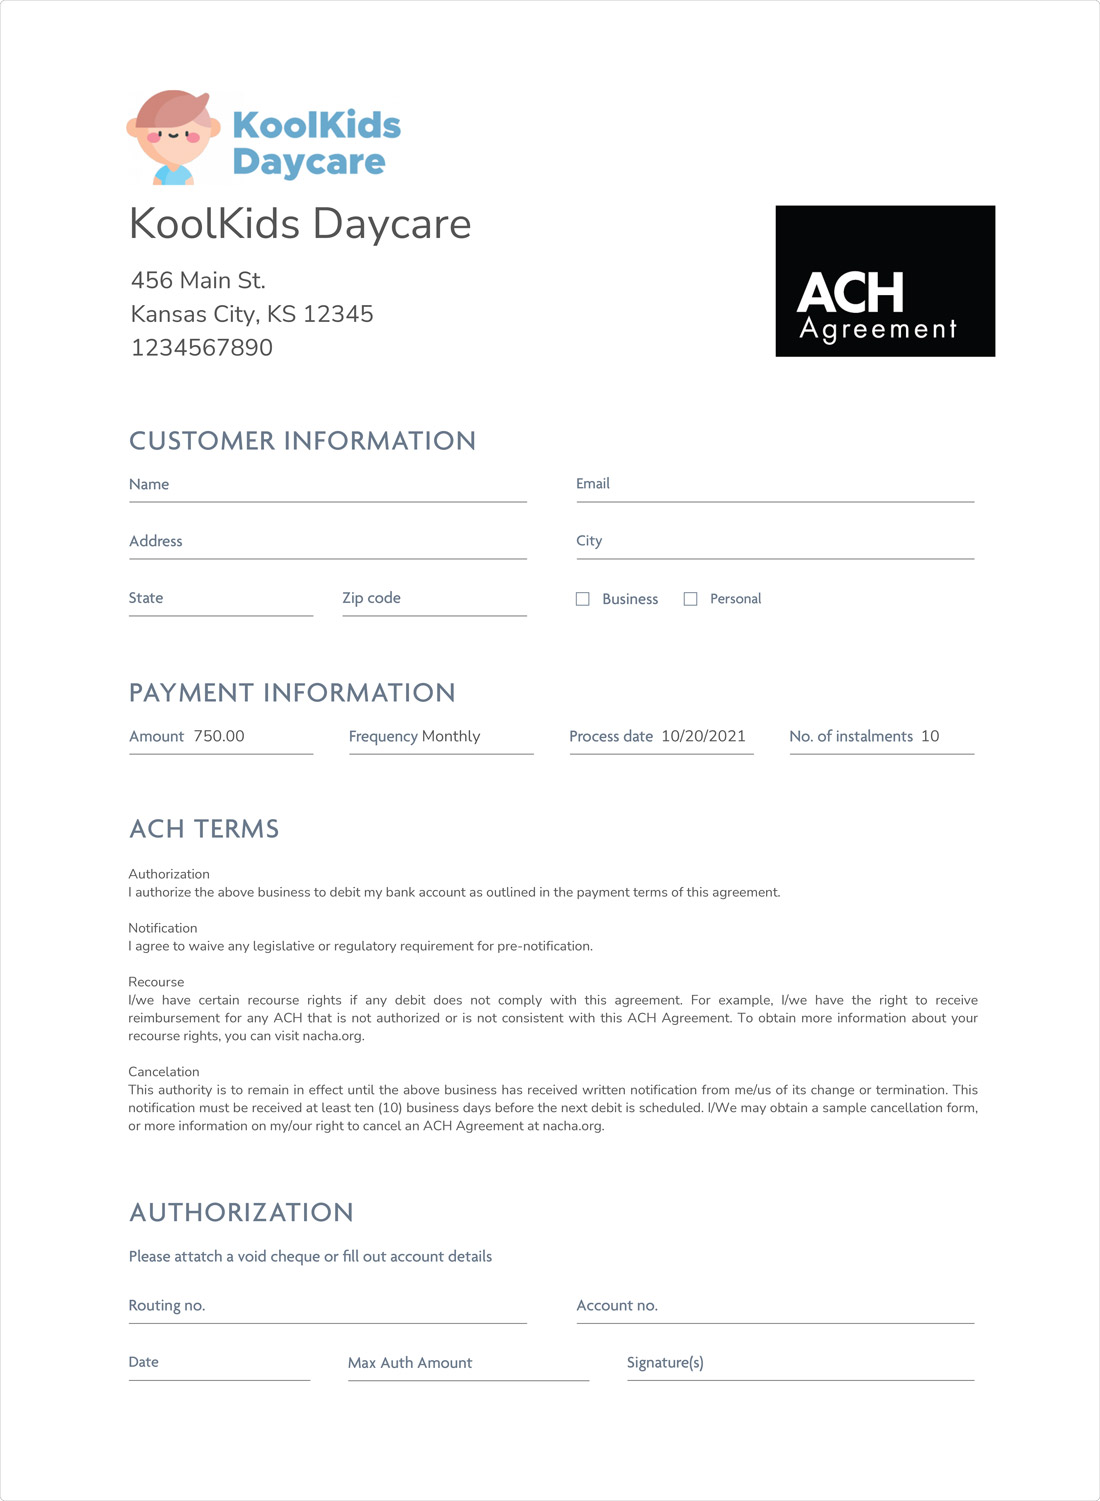 ACH authorization form sample image - daycare